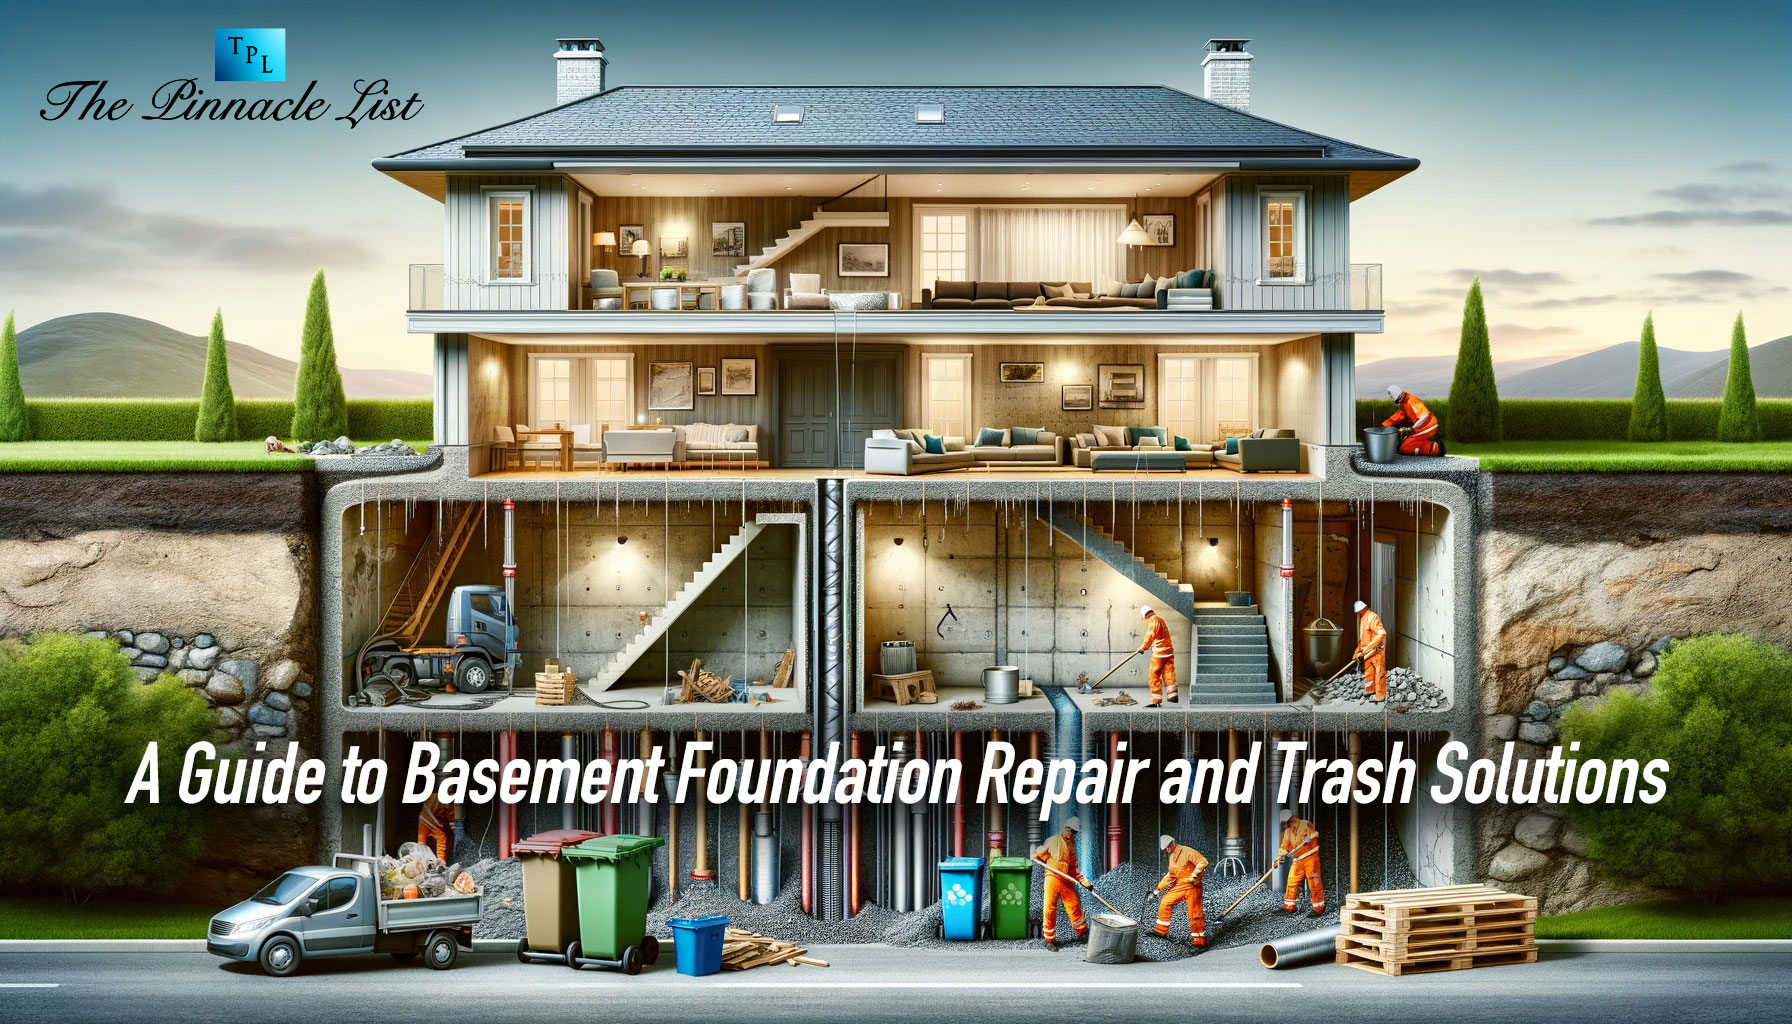 A Guide to Basement Foundation Repair and Trash Solutions